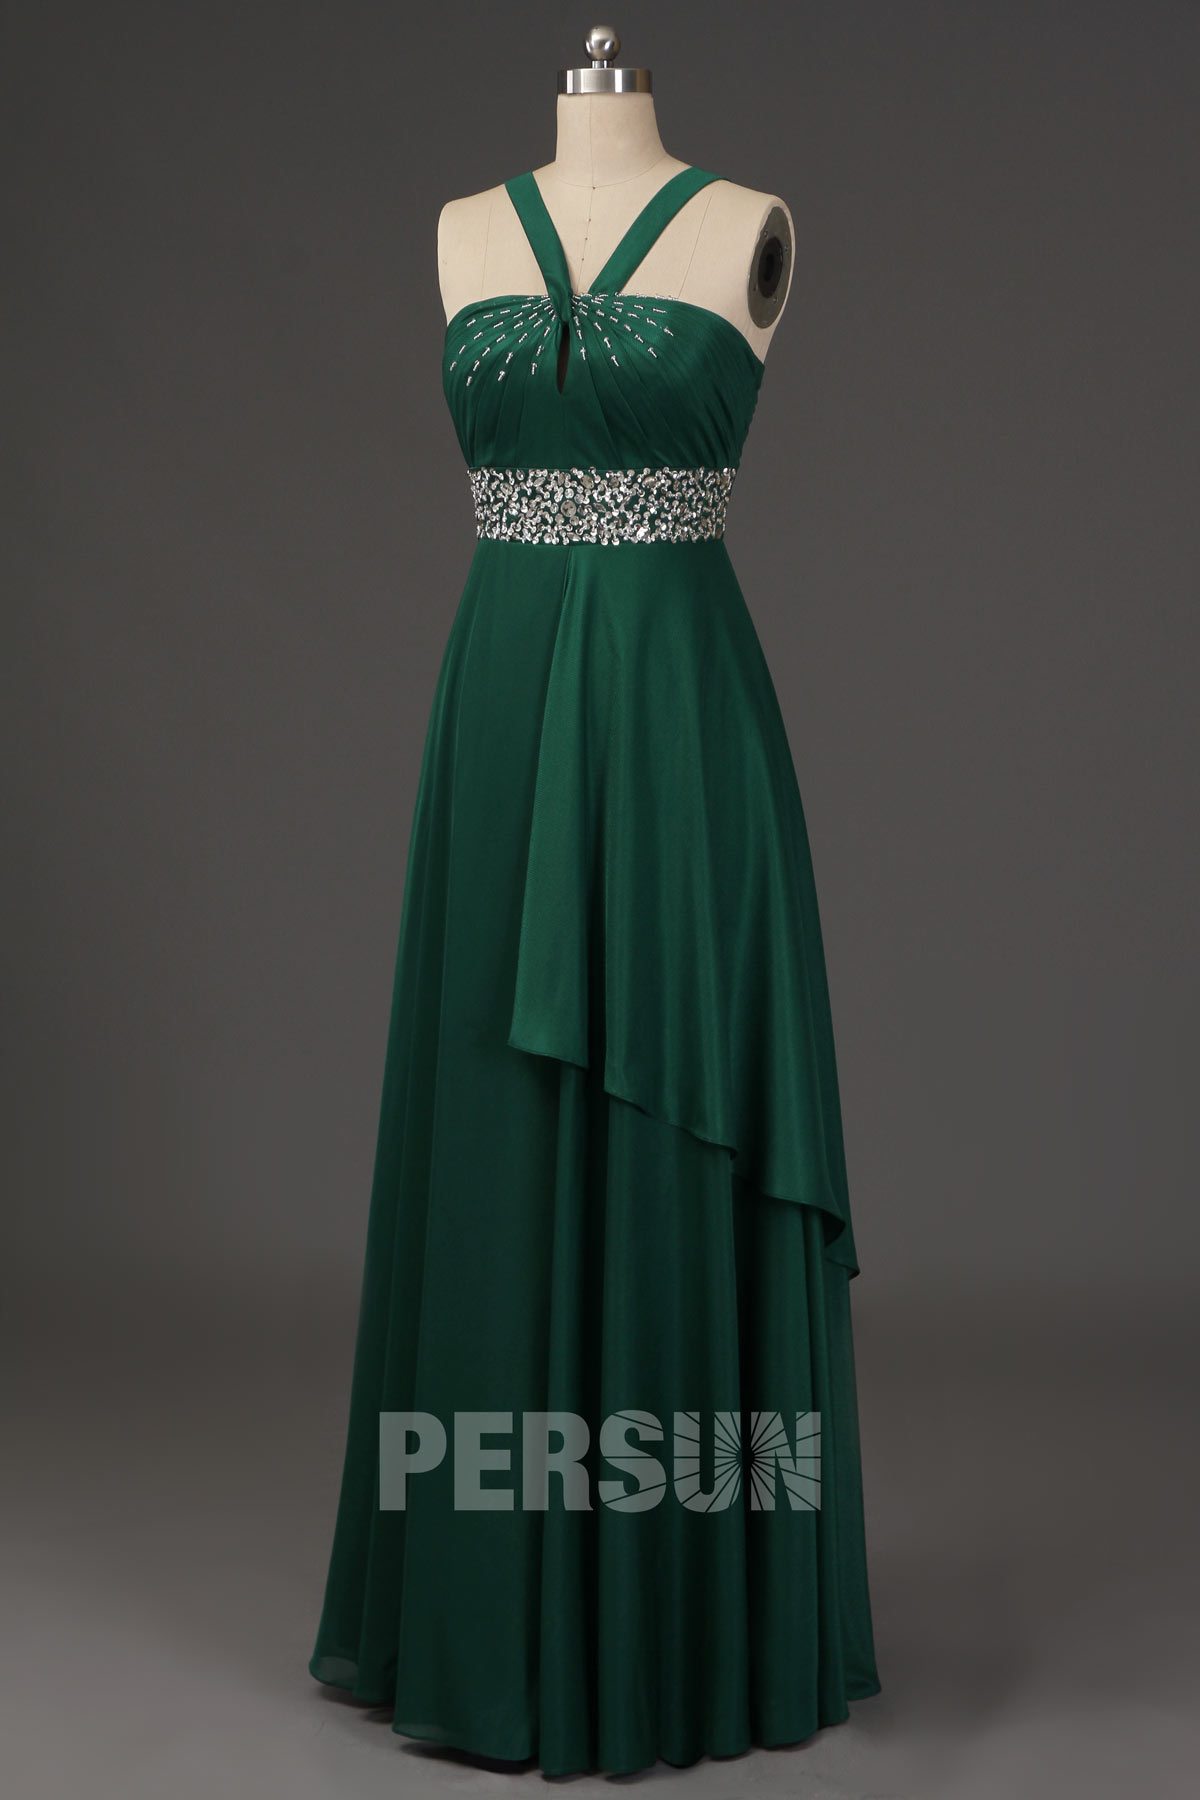 Chic Green Long A Line Chiffon Empire Formal Bridesmaid Dress With Straps